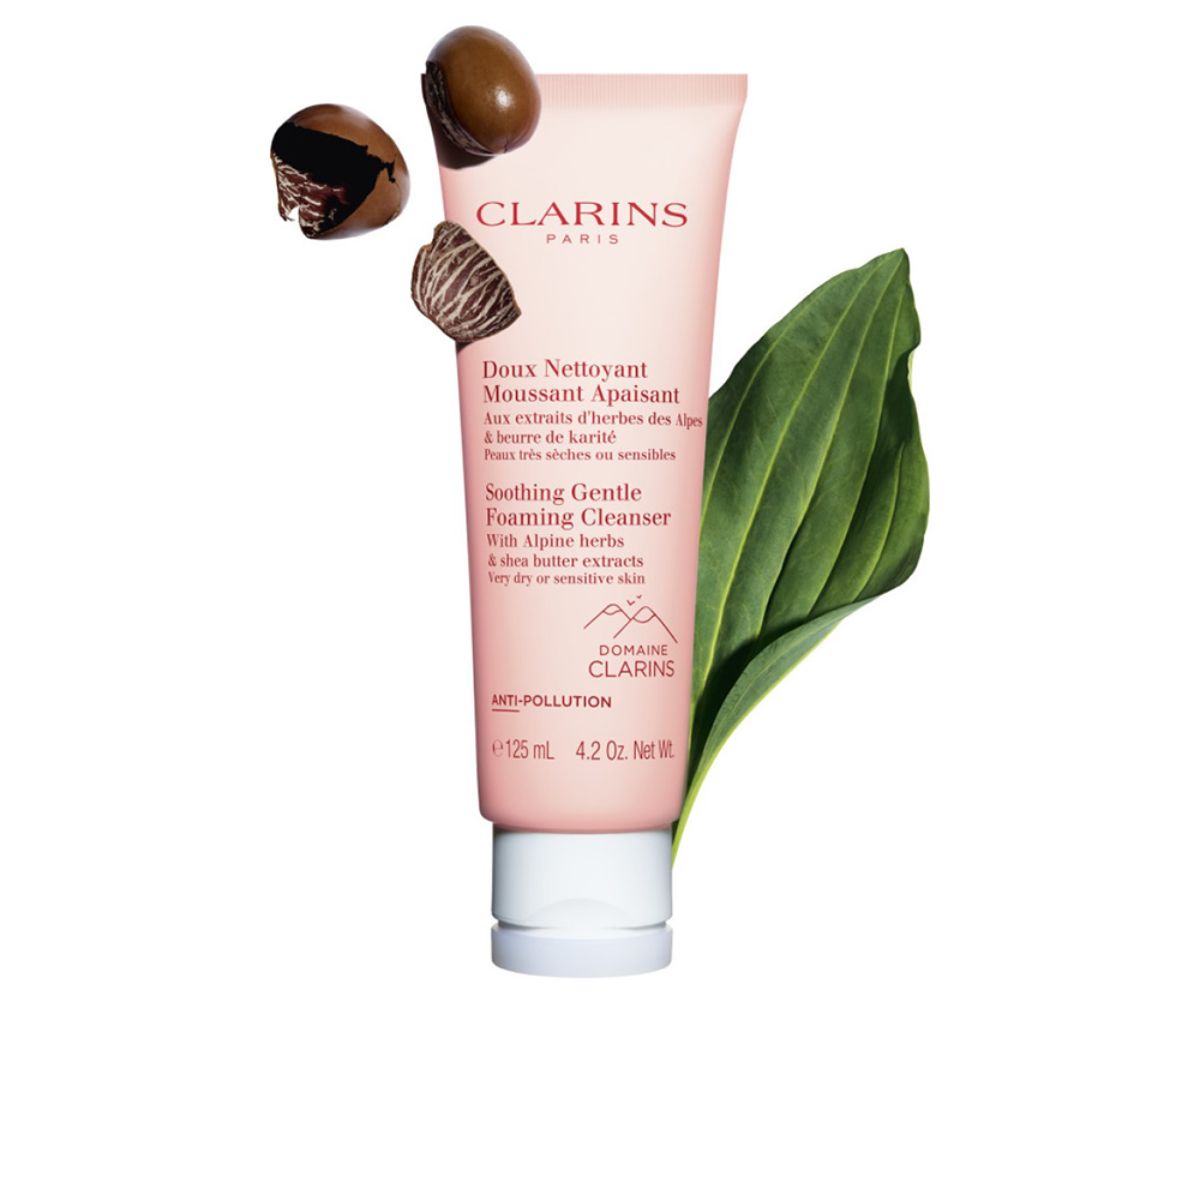 Clarins Gentle Foaming Cleanser Soothing